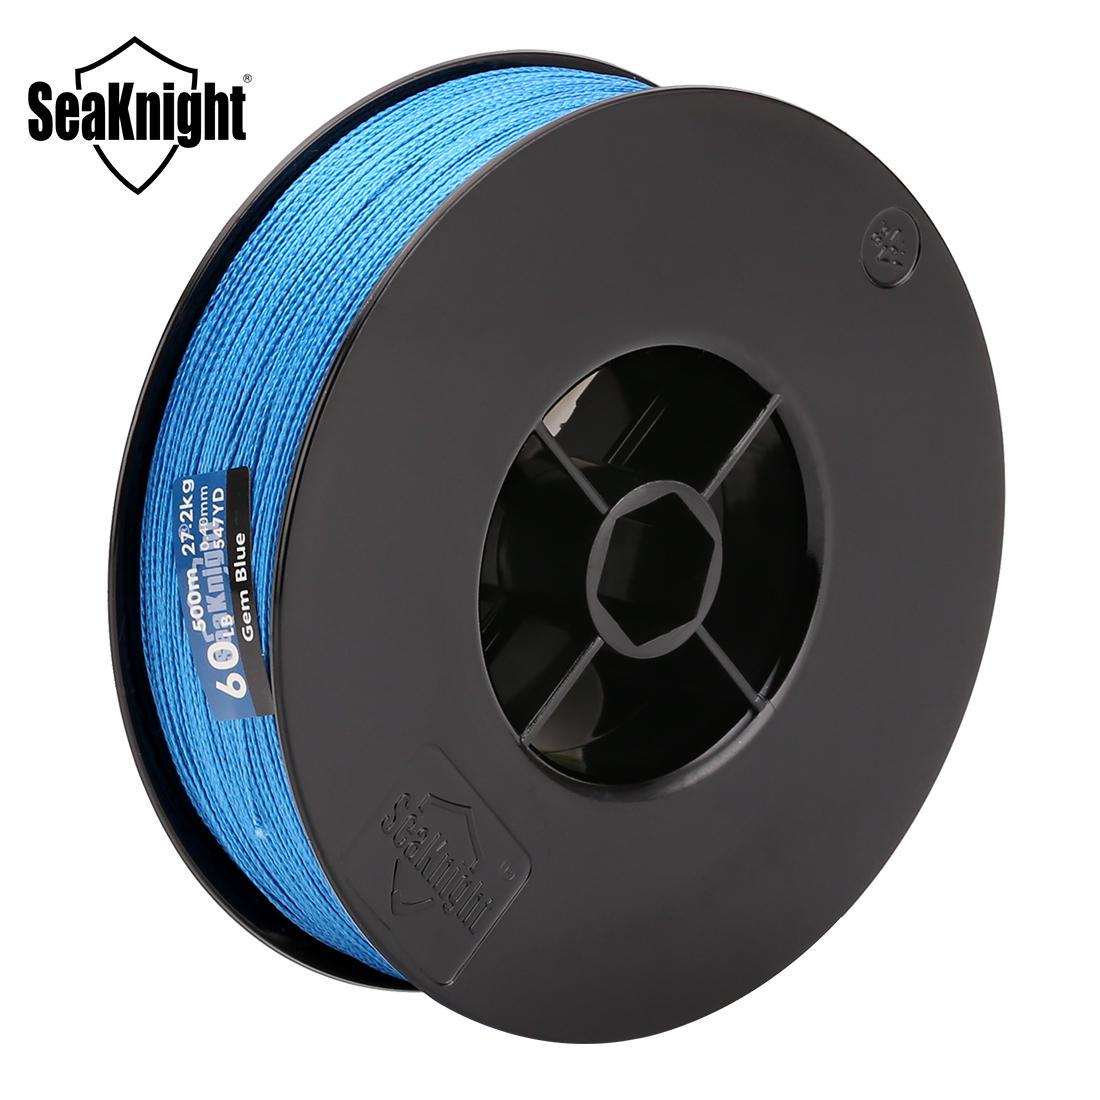 SeaKnight L-500M-CL New Classic 500M Fishing Line Super Strong PE Braided Multifilament Rope 6-80LB